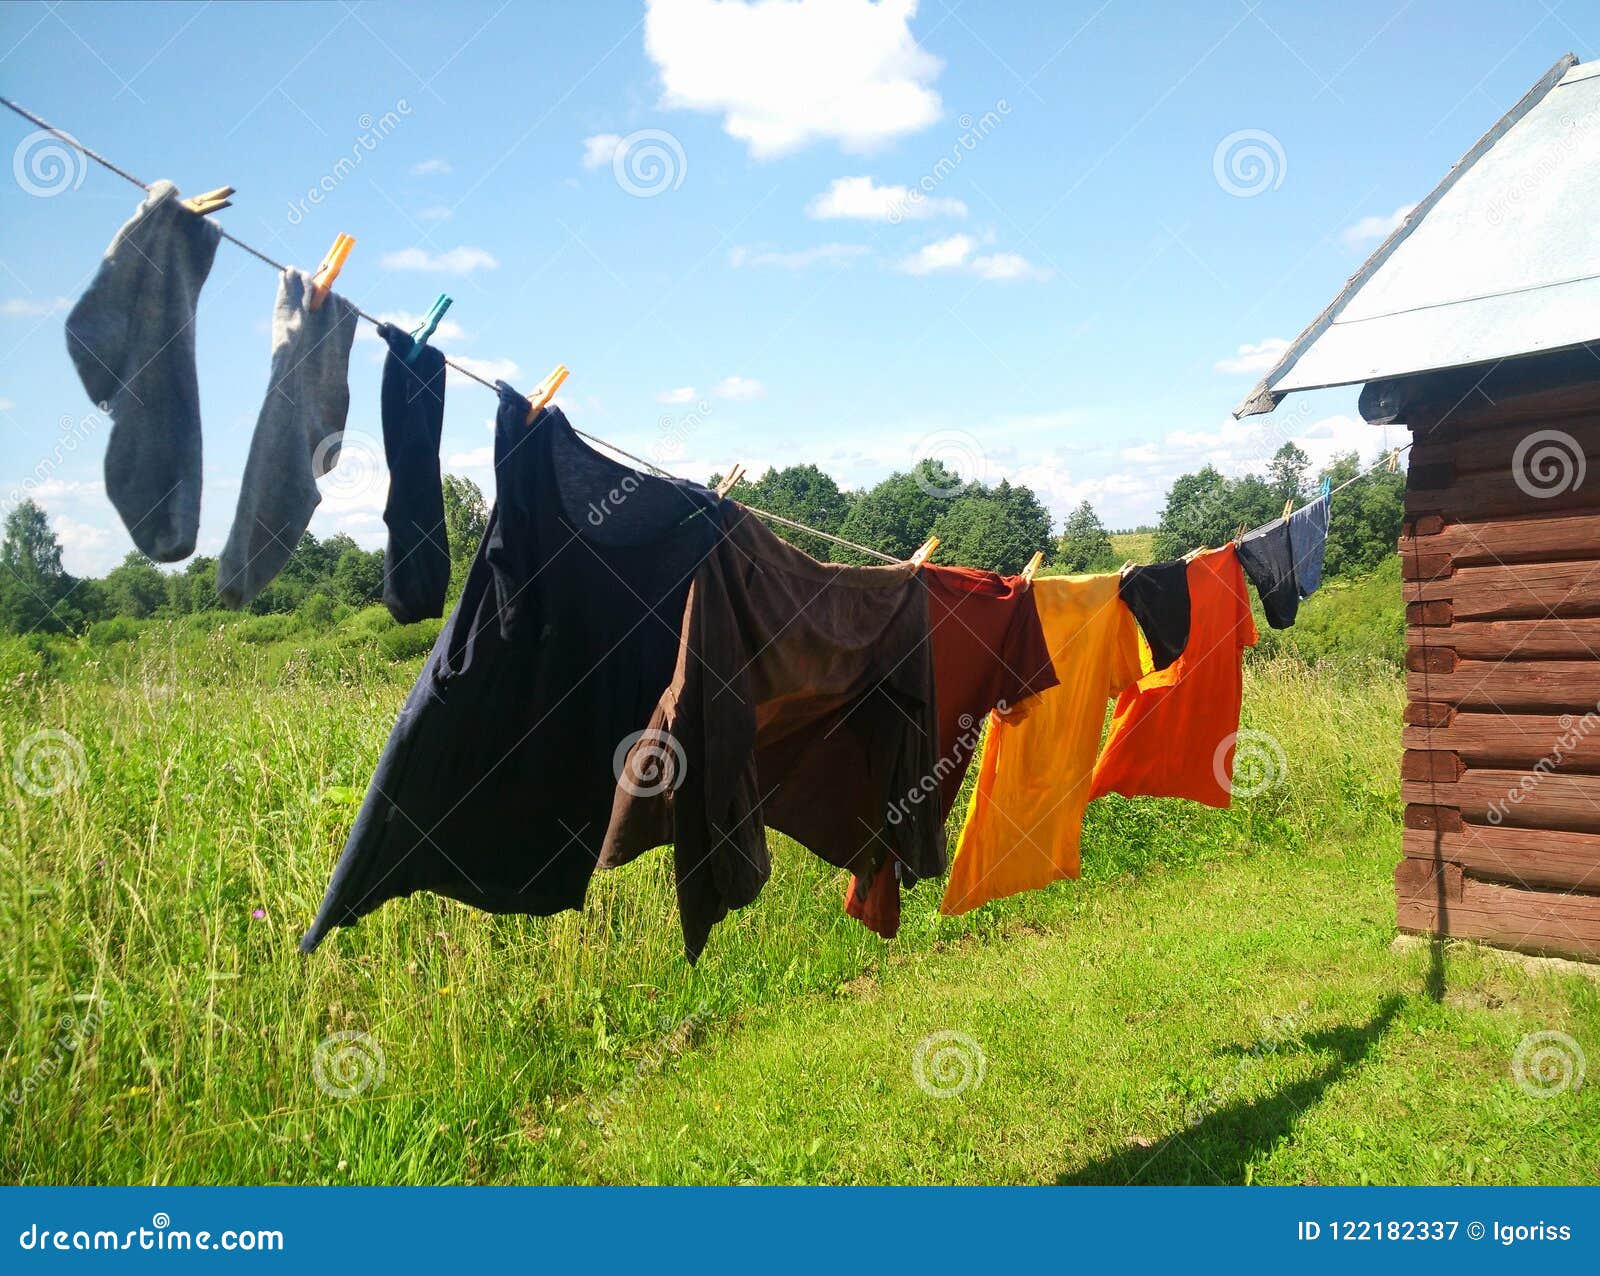 Washing Line with Drying Clothes in Outdoor. Stock Image - Image